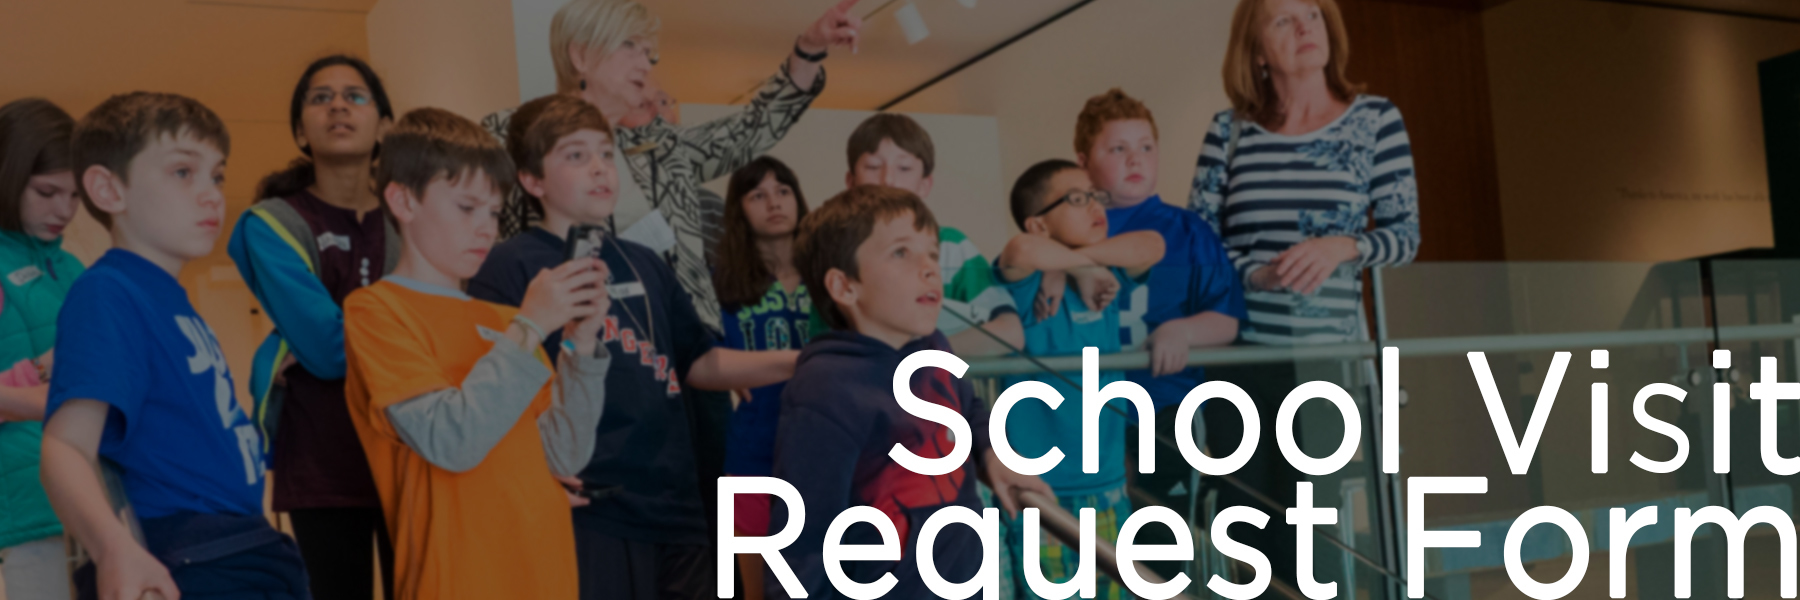 https://nbmaa.org/school-tour-request-form